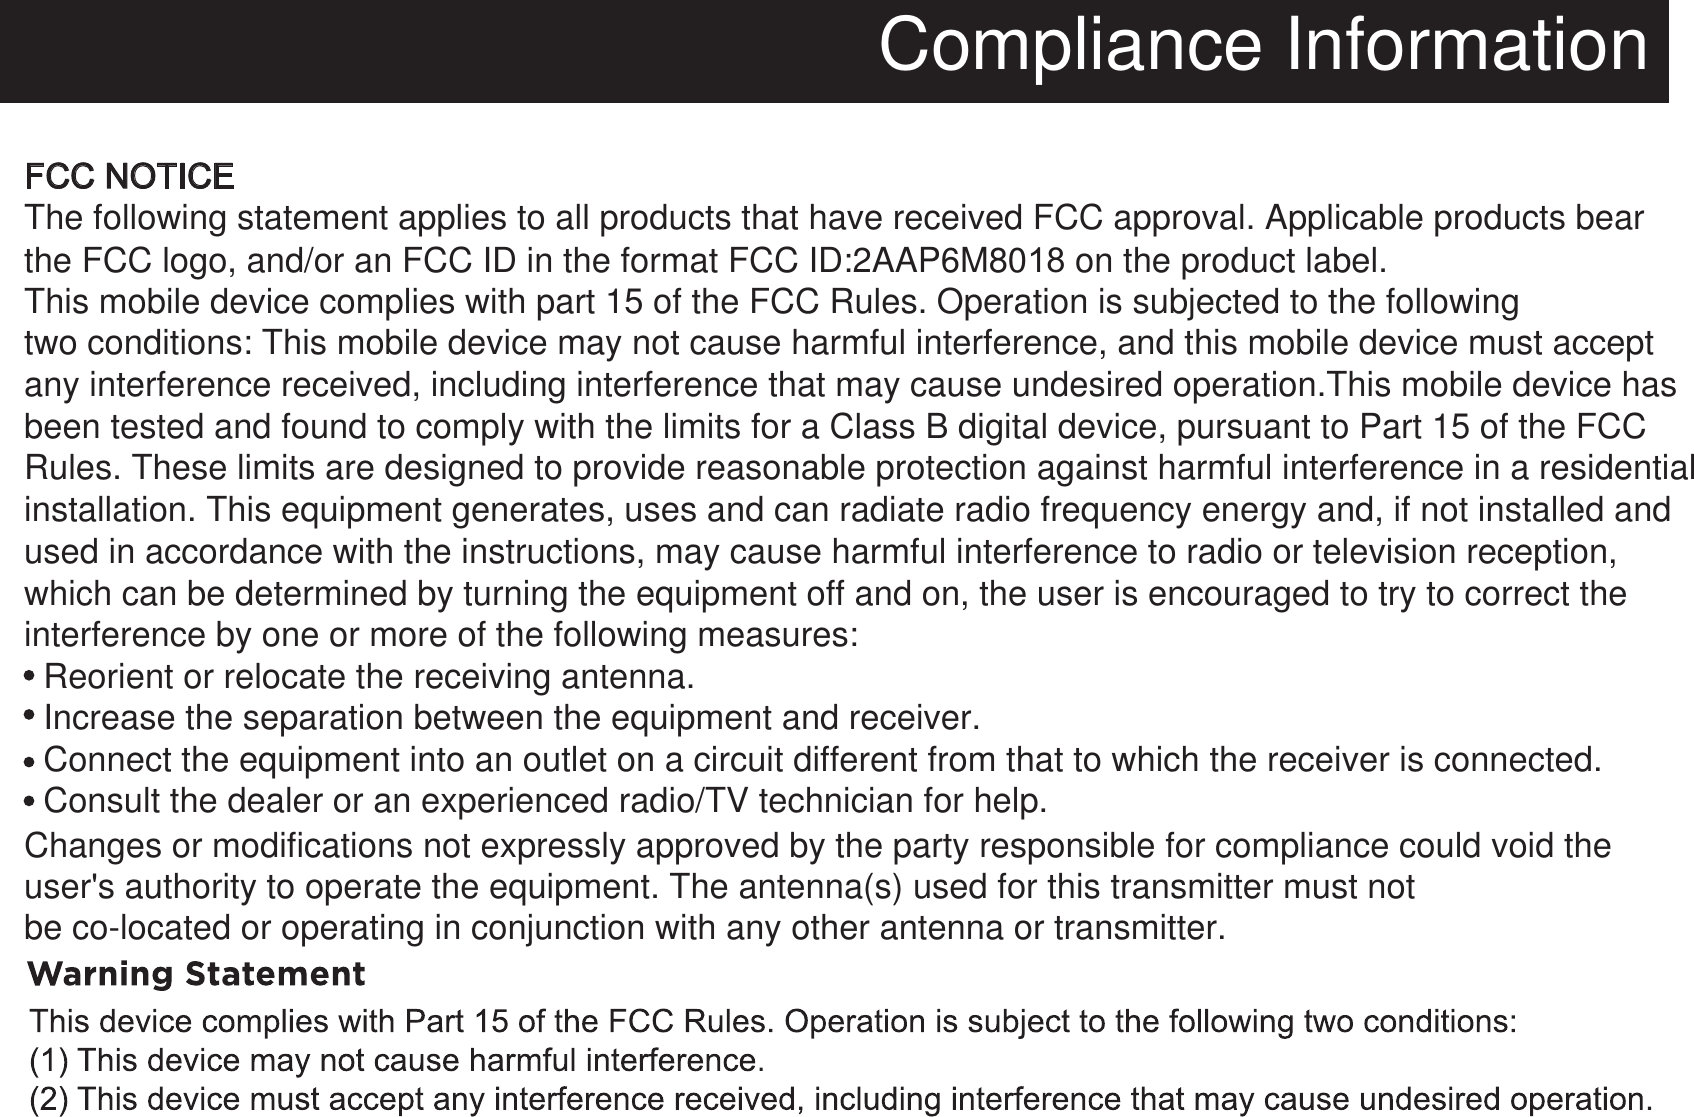 Compliance InformationFCC NOTICEThe following statement applies to all products that have received FCC approval. Applicable products bear   the FCC logo, and/or an FCC ID in the format FCC ID:2AAP6M80 on the product label.This mobile device complies with part 15 of the FCC Rules. Operation is subjected to the following two conditions: This mobile device may not cause harmful interference, and this mobile device must accept any interference received, including interference that may cause undesired operation.This mobile device has been tested and found to comply with the limits for a Class B digital device, pursuant to Part 15 of the FCC Rules. These limits are designed to provide reasonable protection against harmful interference in a residentialinstallation. This equipment generates, uses and can radiate radio frequency energy and, if not installed and used in accordance with the instructions, may cause harmful interference to radio or television reception,which can be determined by turning the equipment off and on, the user is encouraged to try to correct the interference by one or more of the following measures:  Reorient or relocate the receiving antenna.  Increase the separation between the equipment and receiver.  Connect the equipment into an outlet on a circuit different from that to which the receiver is connected.  Consult the dealer or an experienced radio/TV technician for help. Changes or modifications not expressly approved by the party responsible for compliance could void the user&apos;s authority to operate the equipment. The antenna(s) used for this transmitter must notbe co-located or operating in conjunction with any other antenna or transmitter.